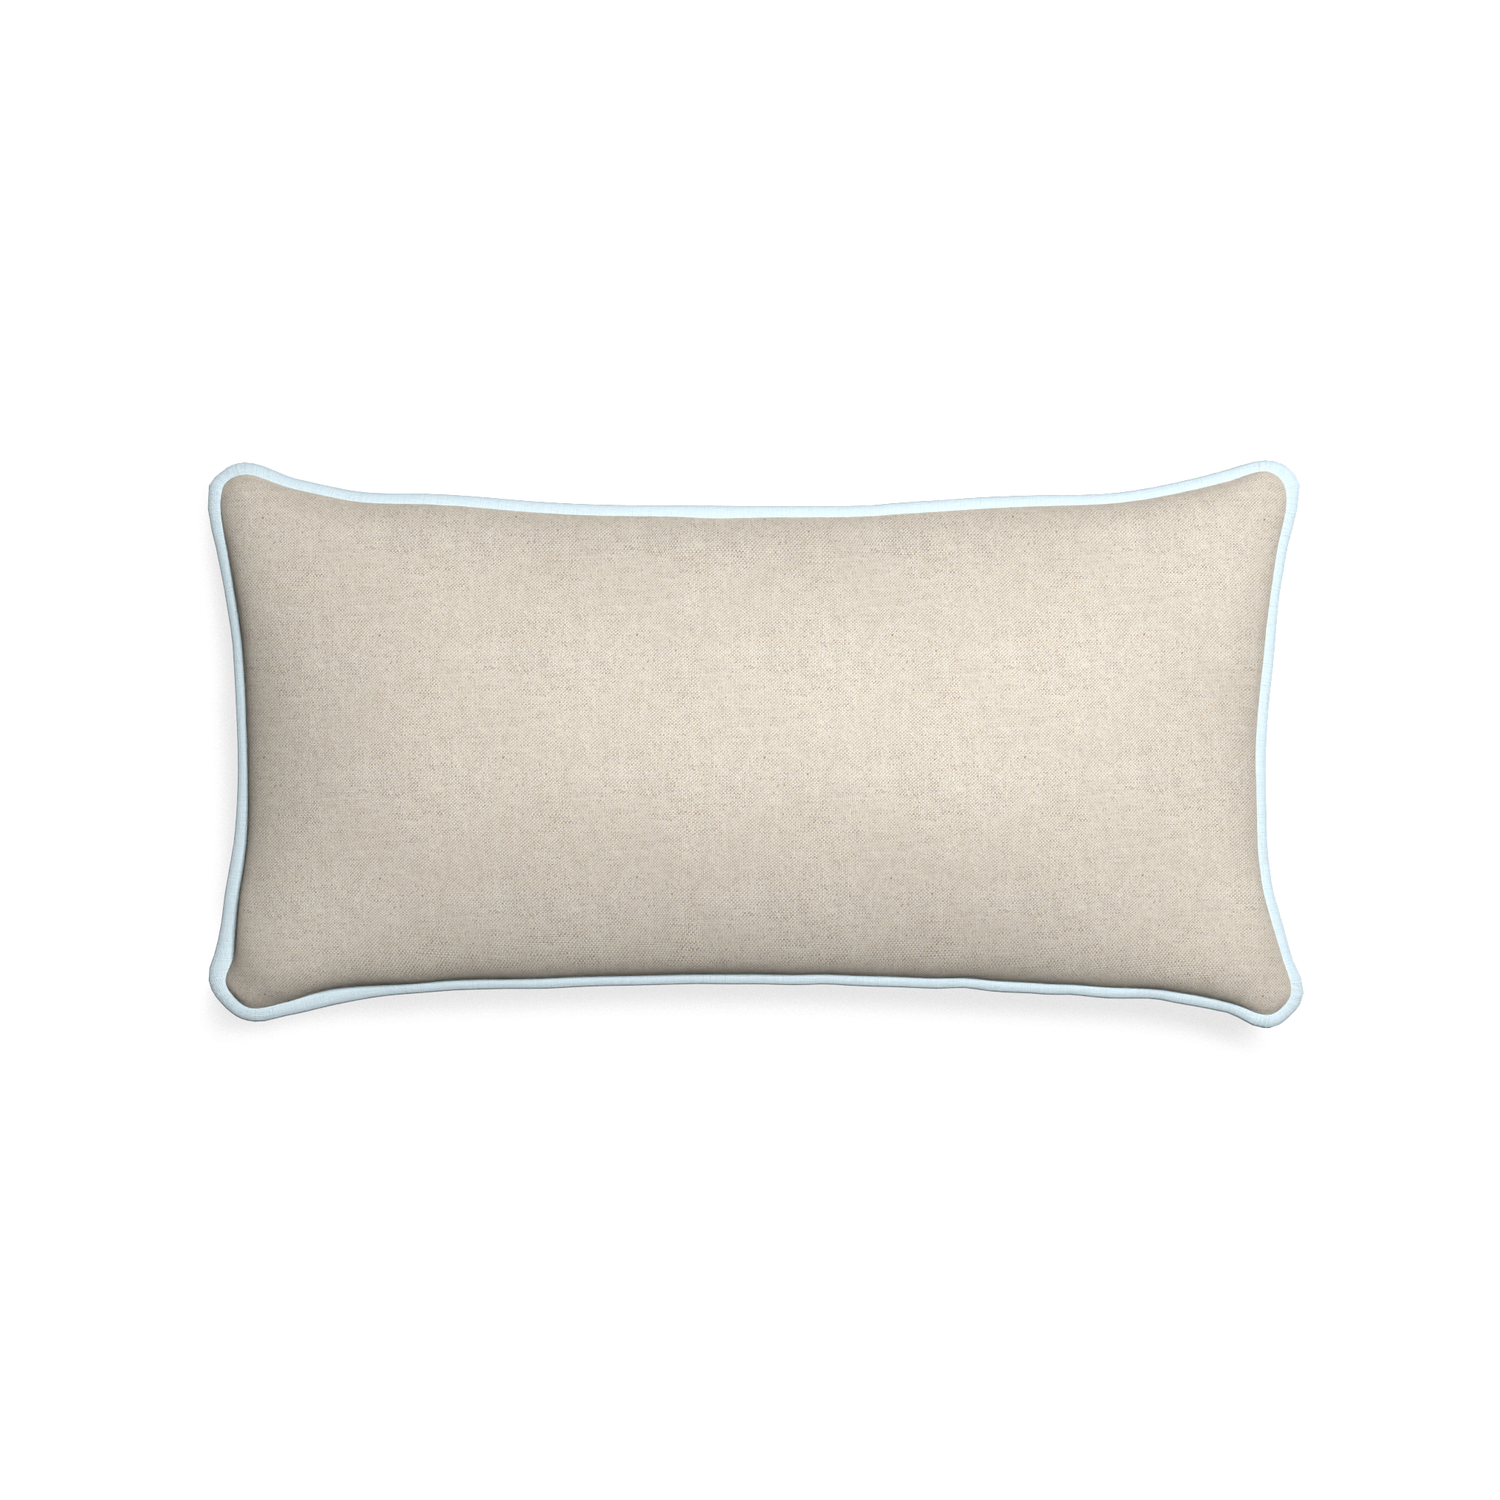 Midi-lumbar oat custom light brownpillow with powder piping on white background